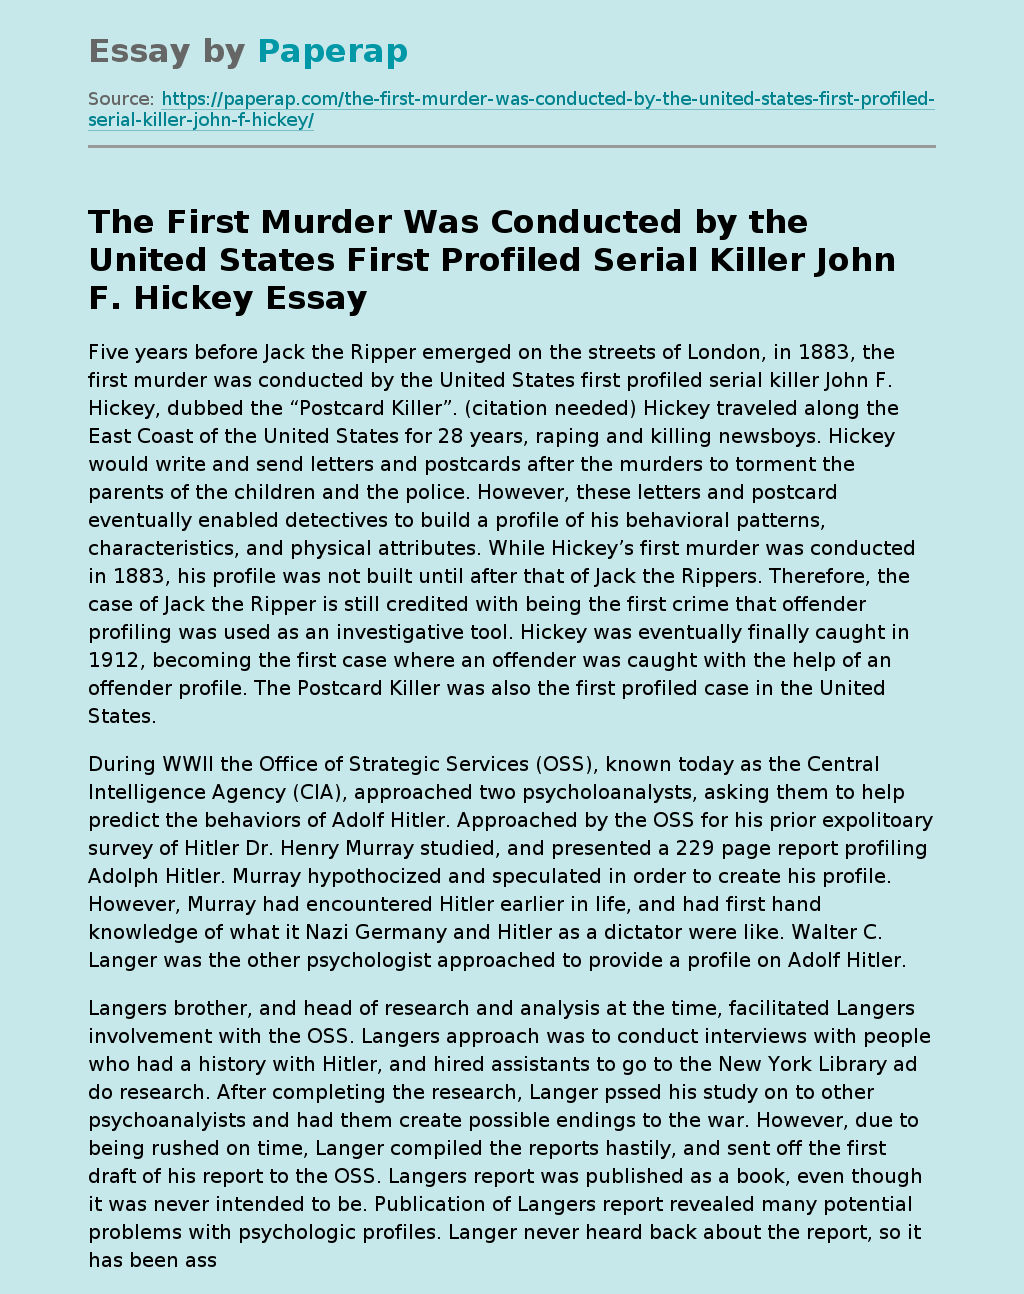 The First Murder Was Conducted by the United States First Profiled Serial Killer John F. Hickey